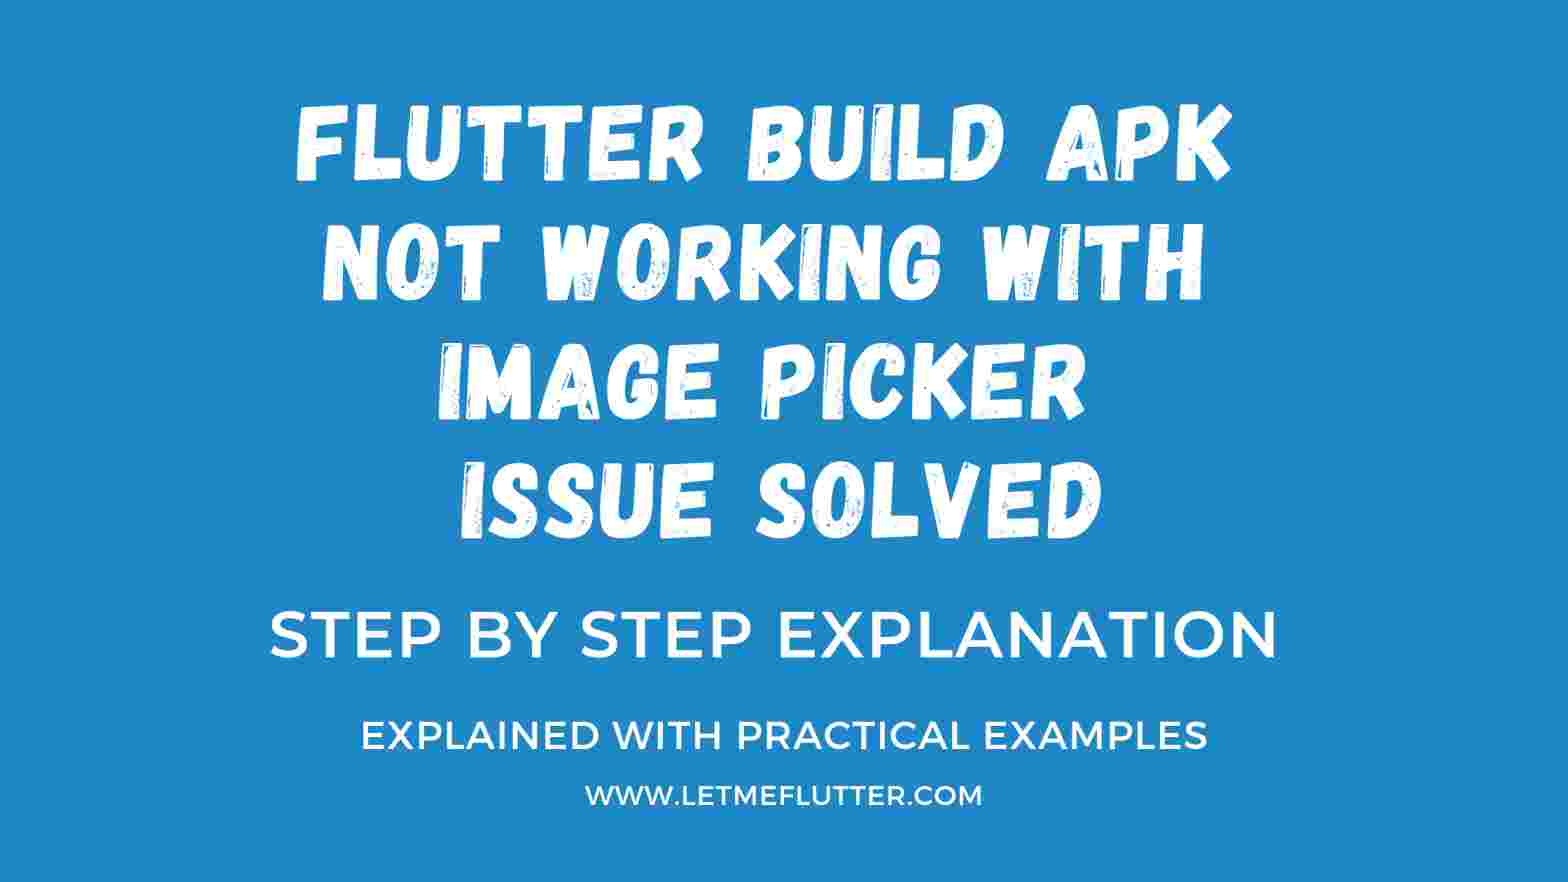 flutter build apk not working with image picker